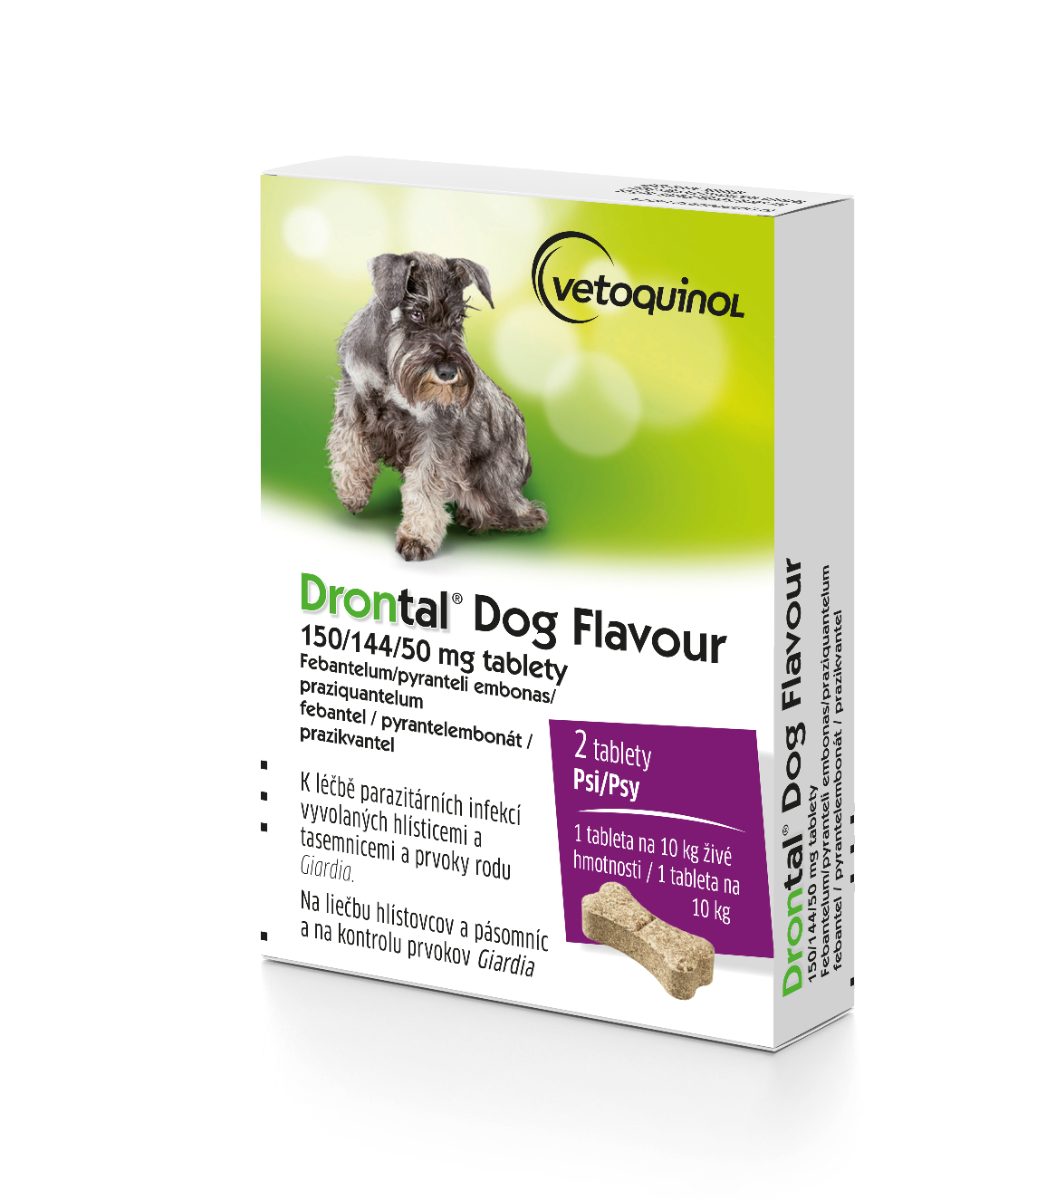 Drontal Dog Flavour 15014450 mg tablety